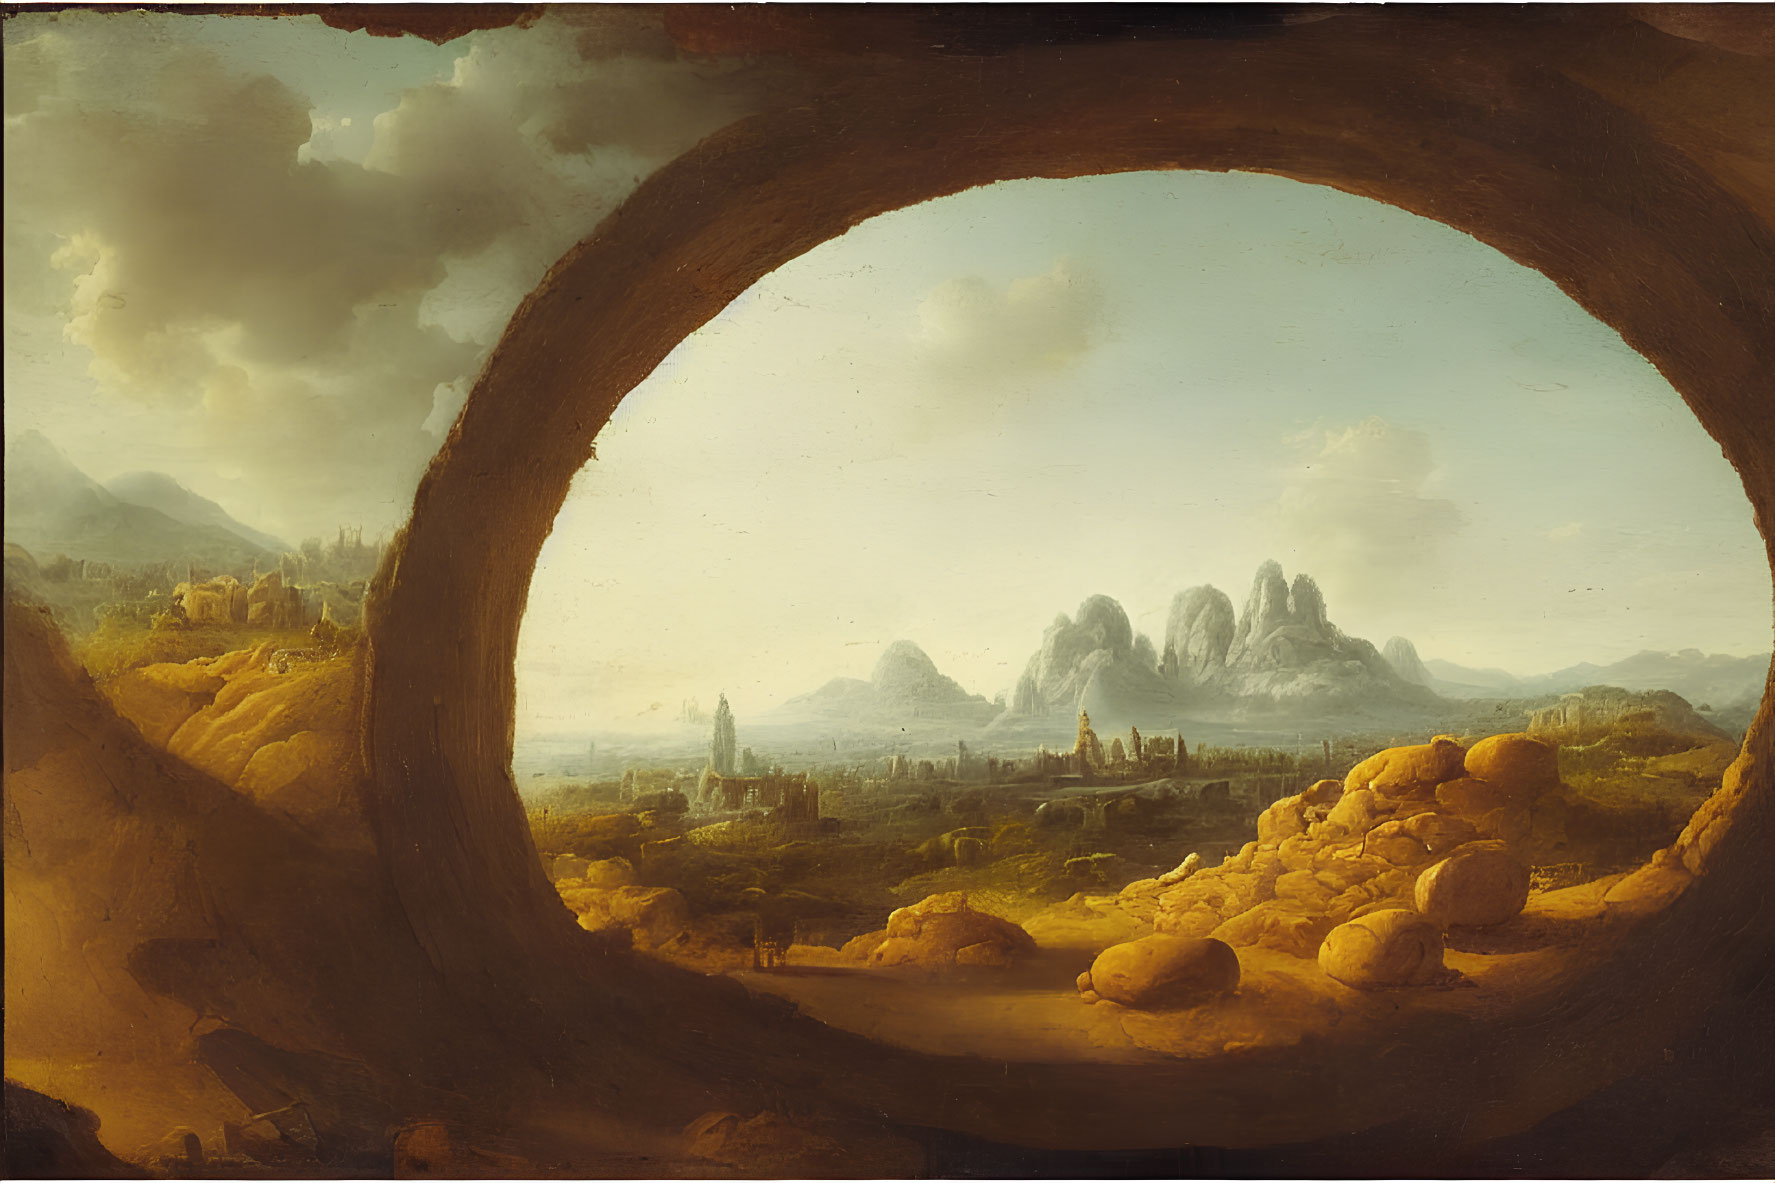 Landscape Painting Framed by Stone Opening: Hills, Town, Mountains, Cloudy Sky